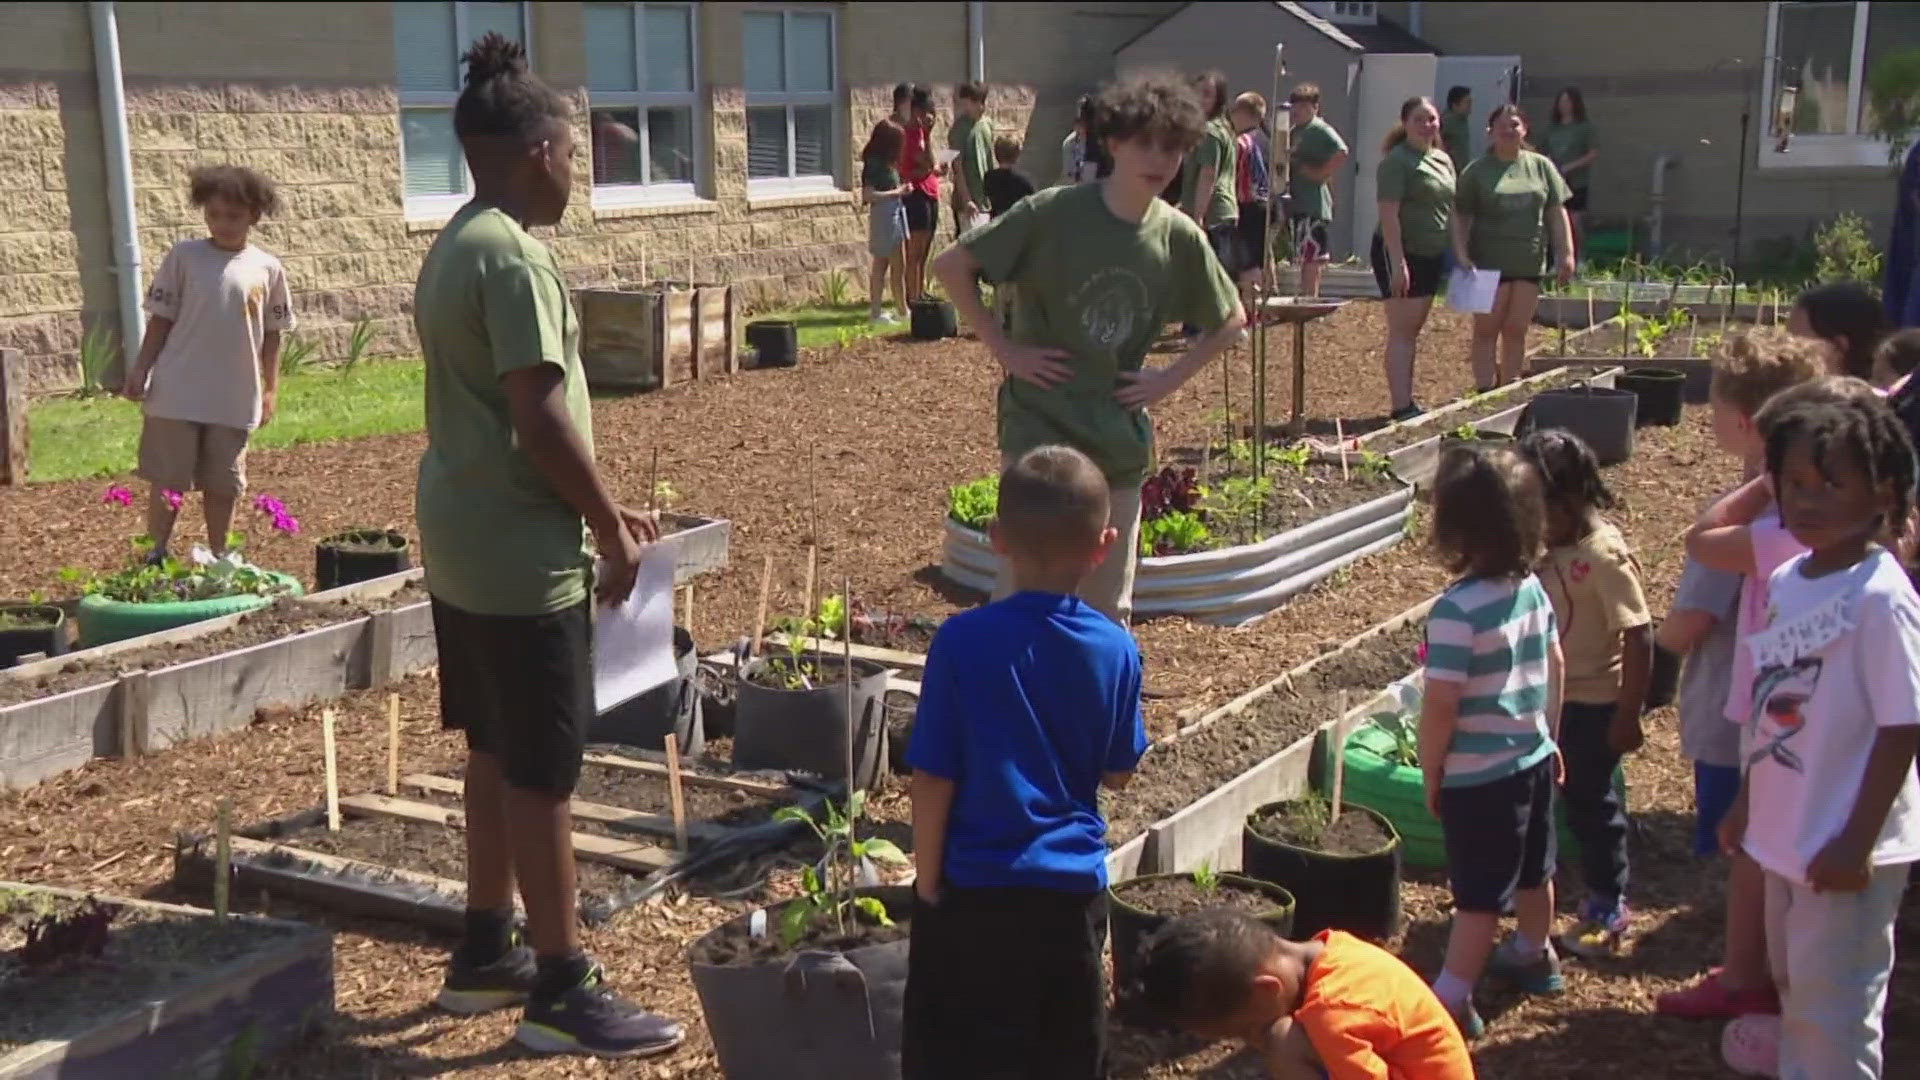 The garden gives students a chance to learn things like growing and taking care of various plants.